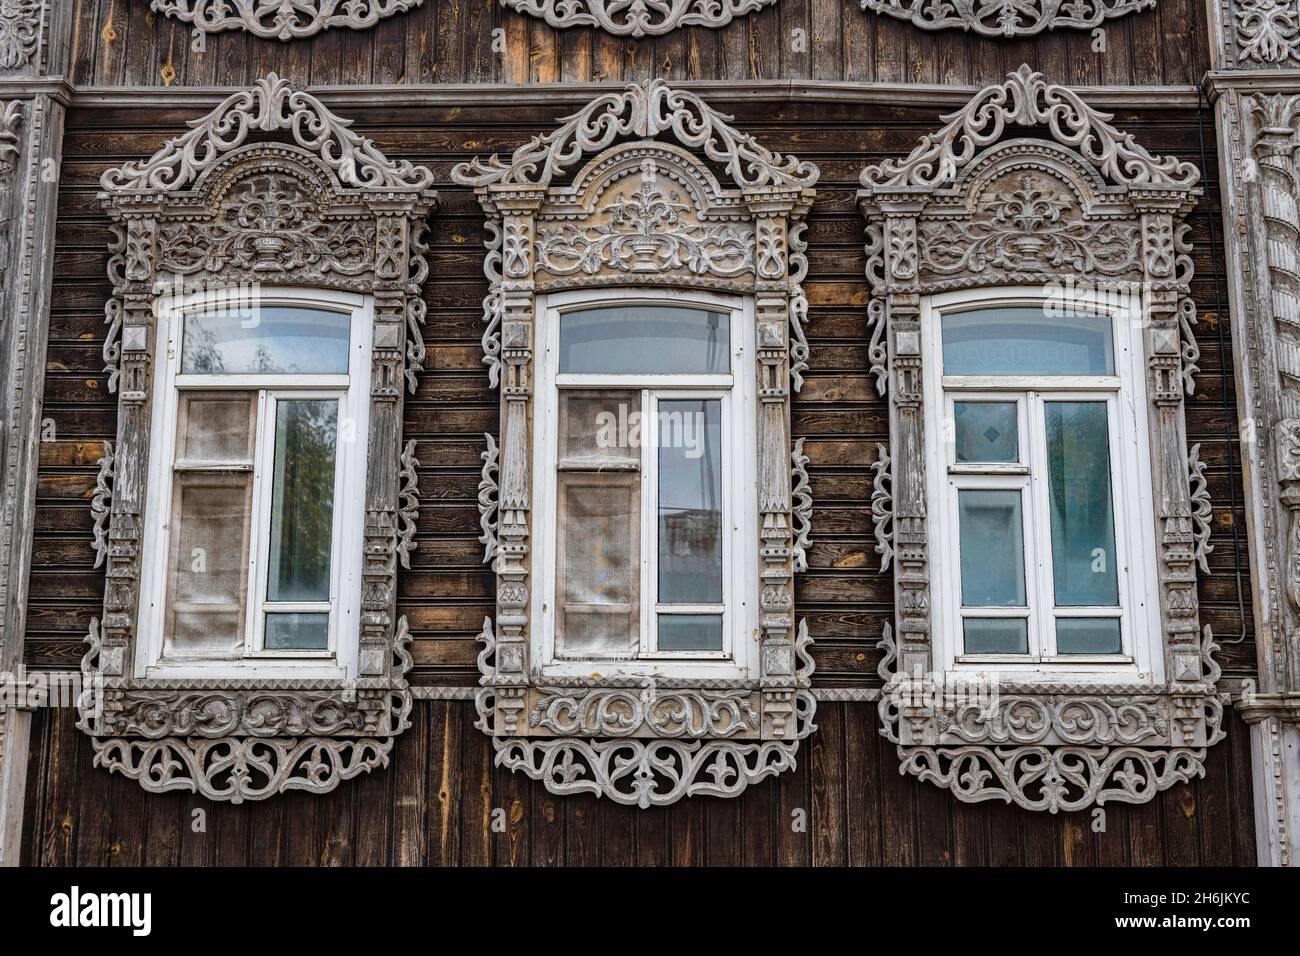 Beautiful wooden windows, Old wooden house, Tomsk, Tomsk Oblast, Russia, Eurasia Stock Photo